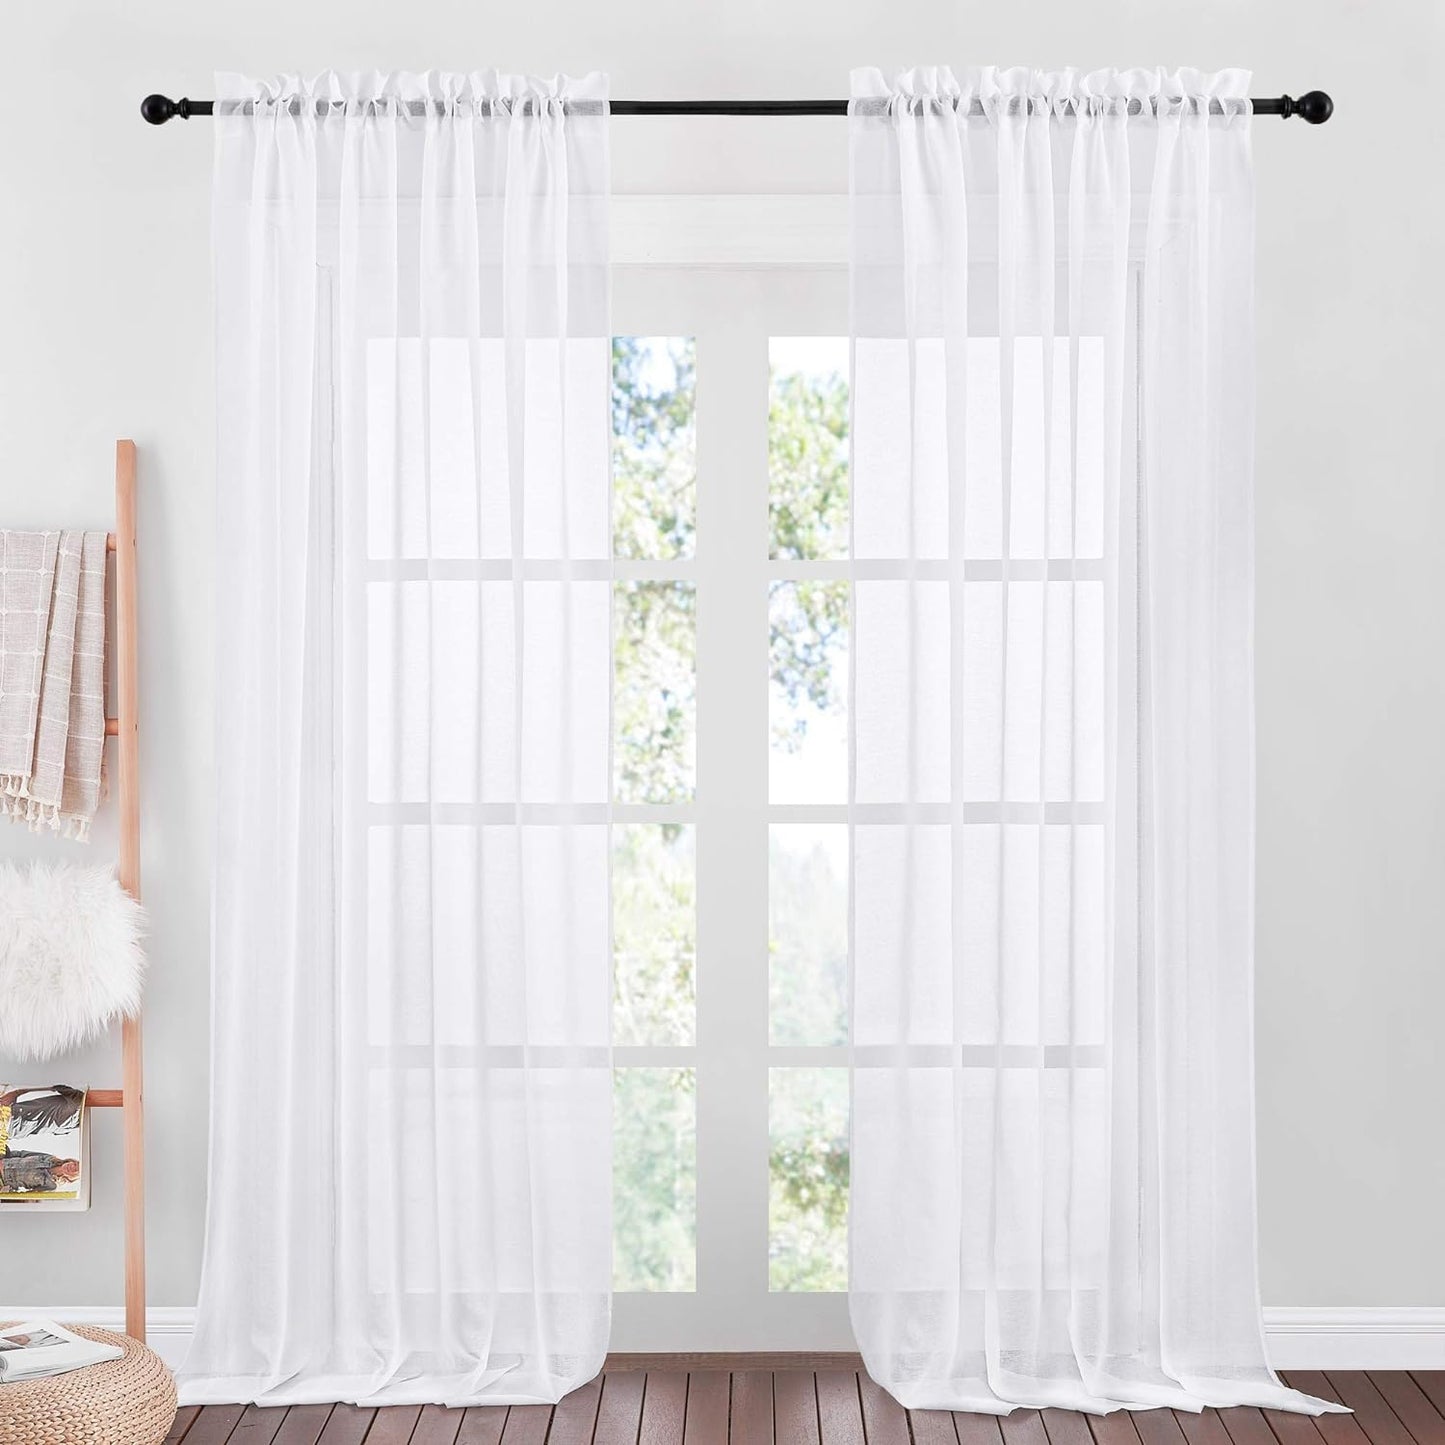 NICETOWN White Semi Sheer Curtains for Living Room- Linen Texture Light Airy Drapes, Rod Pocket & Back Tab Design Voile Panels for Large Window, Set of 2, 55 X 108 Inch  NICETOWN White - Rod Pocket Only W55 X L95 